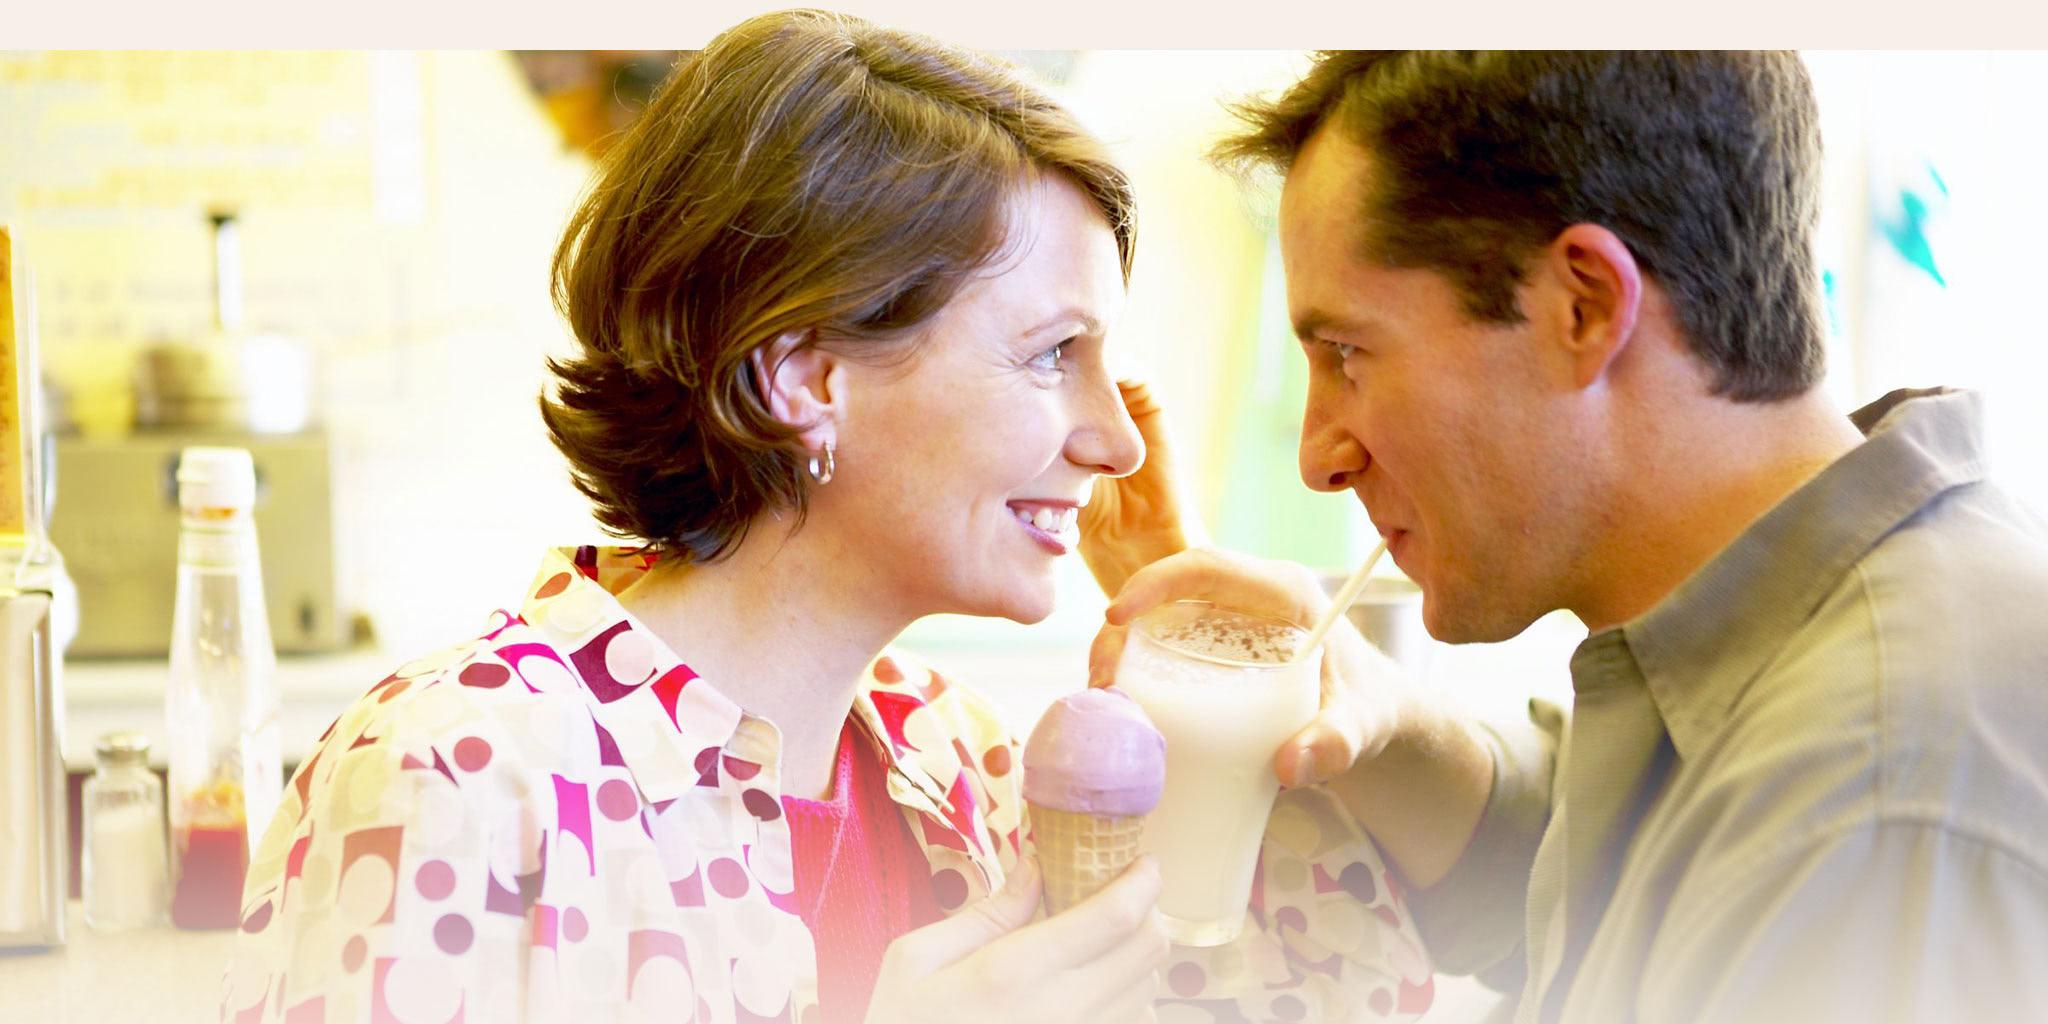 A couple looking at each other while eating ice cream